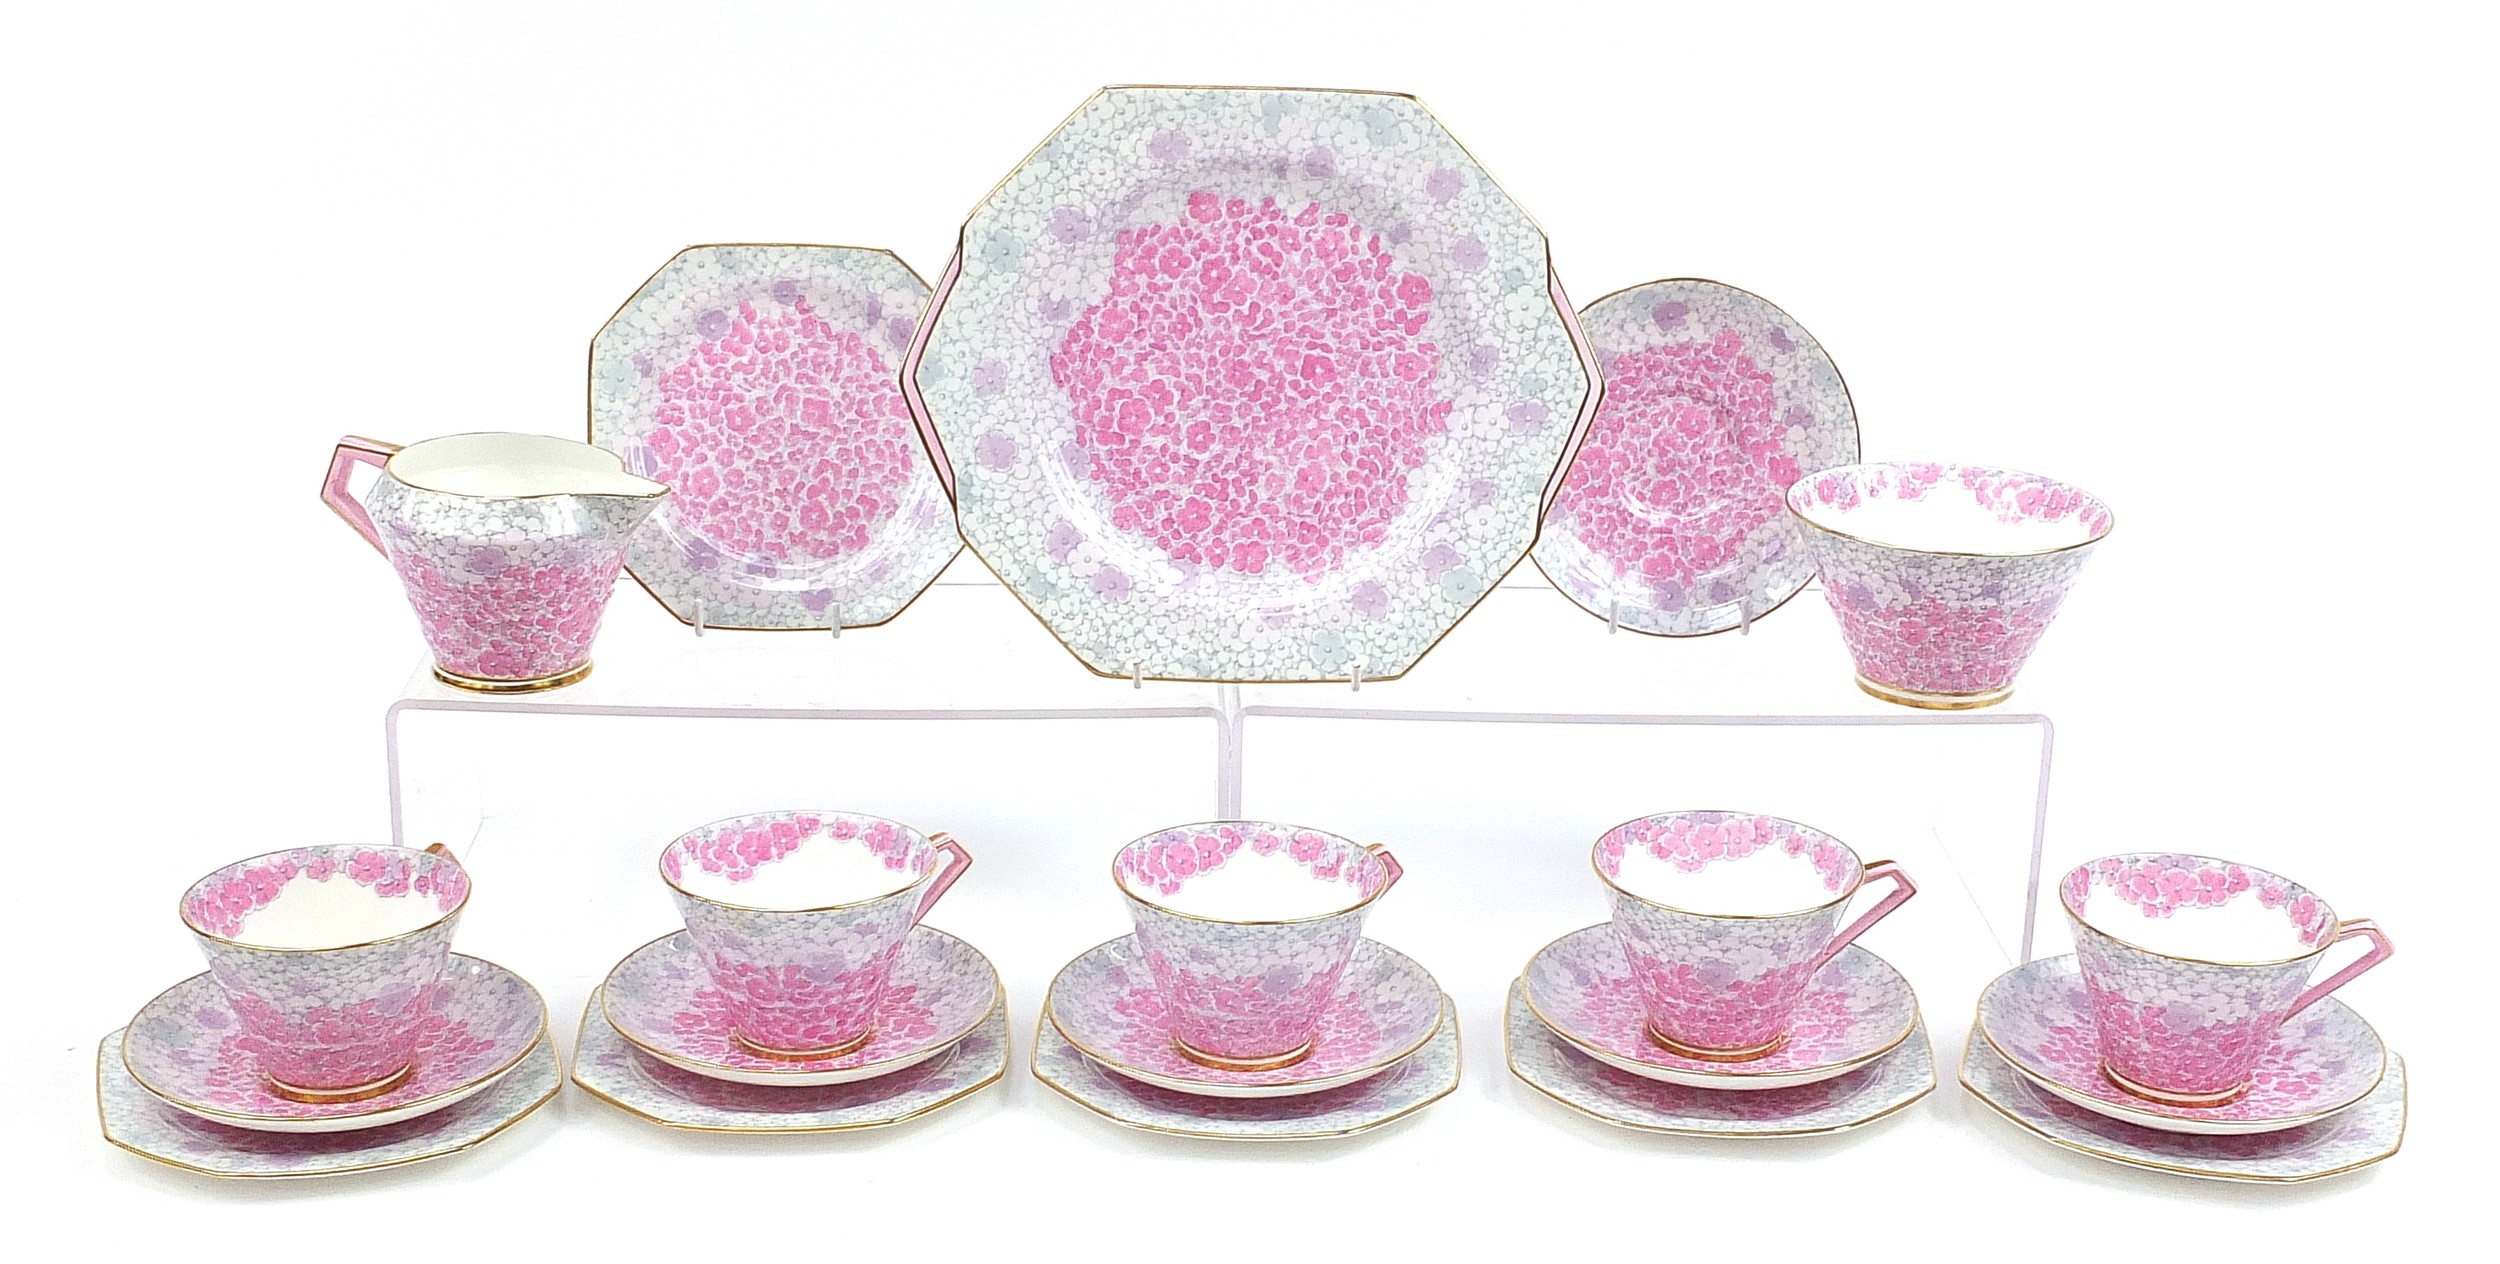 Royal Paragon tea ware, replica of service made for HM The Queen, the largest 25.5cm wide